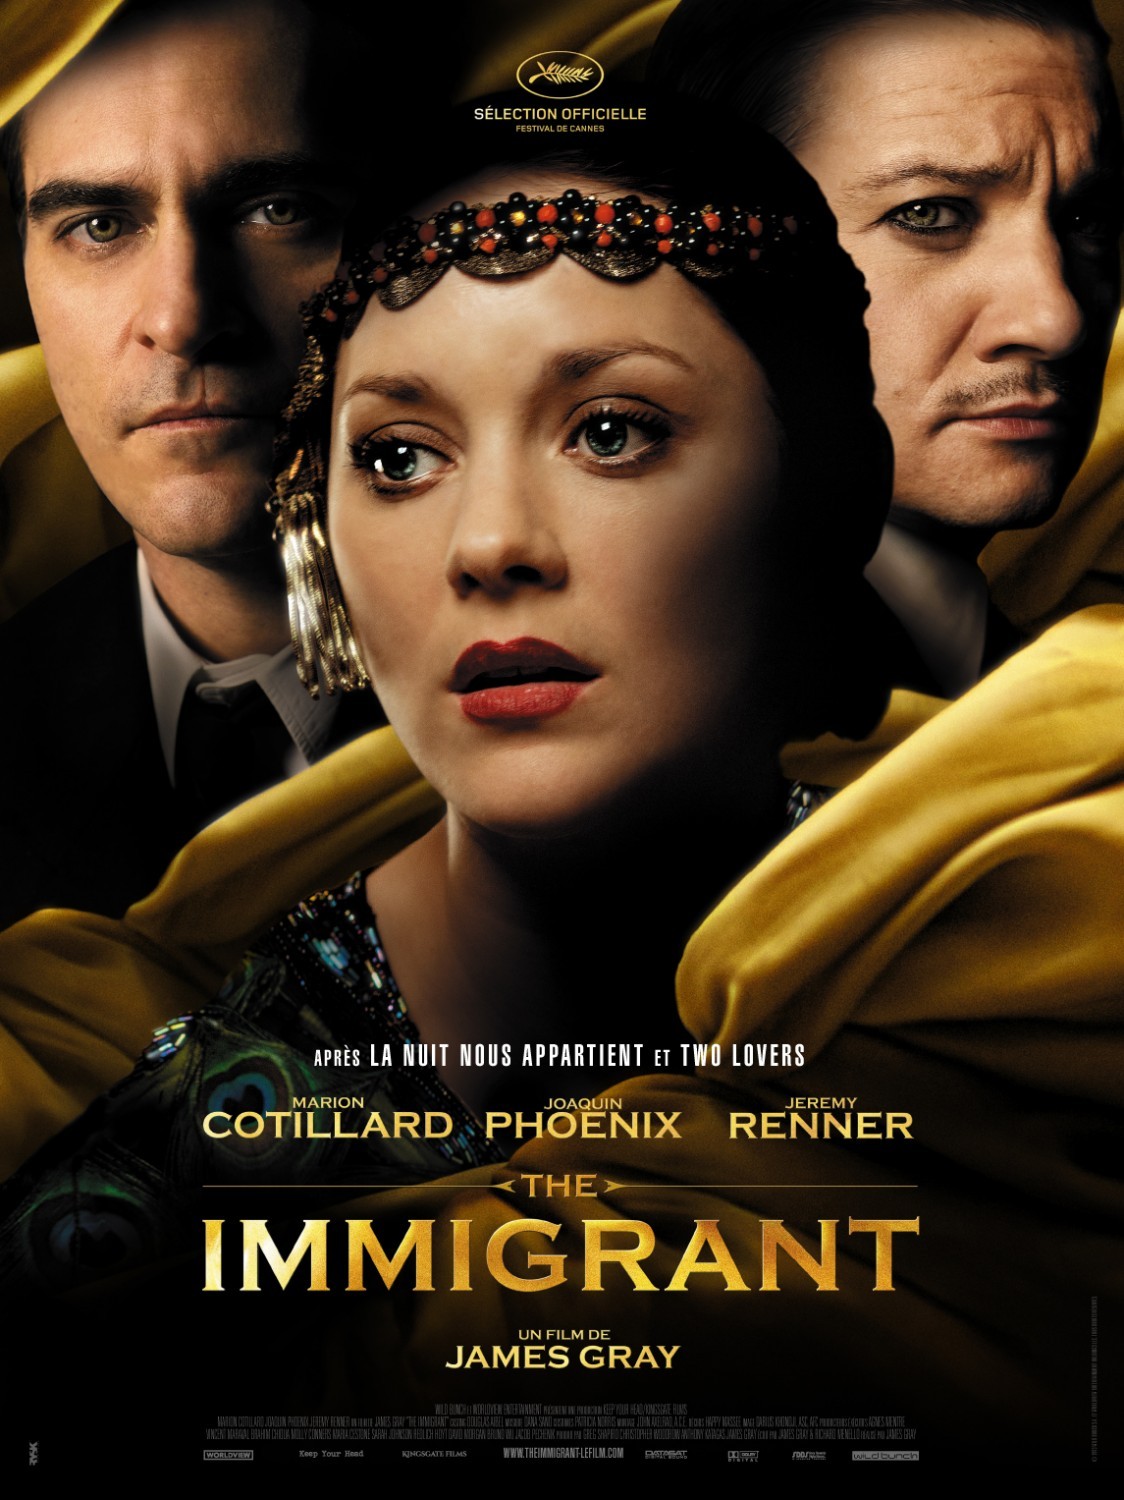 http://grosbif.typepad.fr/Images/Cannes/Films/The-Immigrant-Poster.jpg